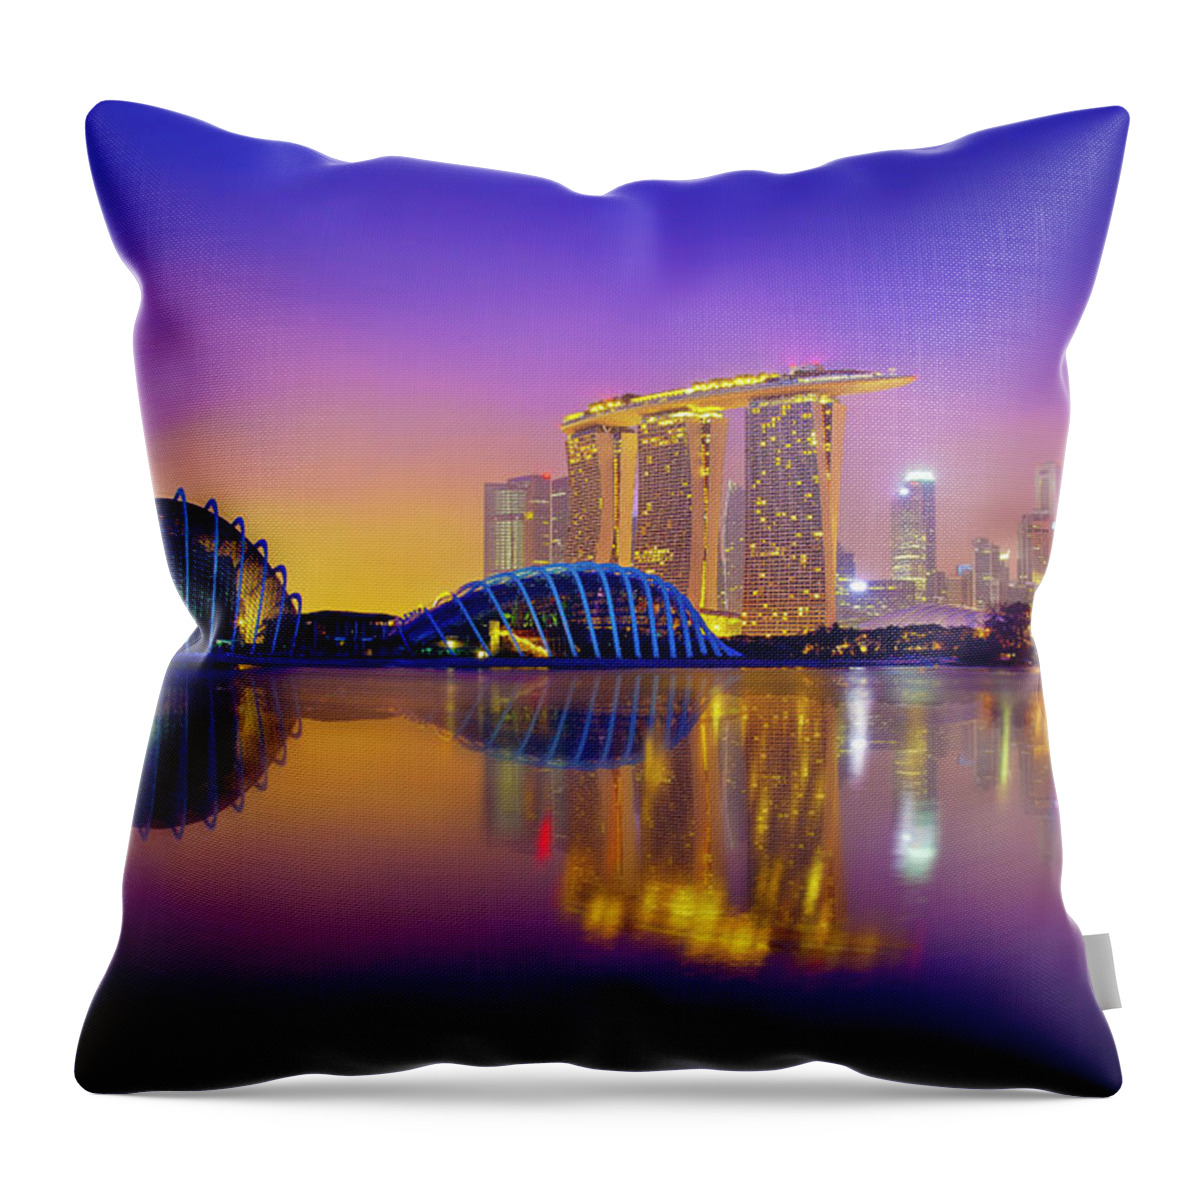 Tranquility Throw Pillow featuring the photograph Singapore Marina Bay by Seng Chye Teo